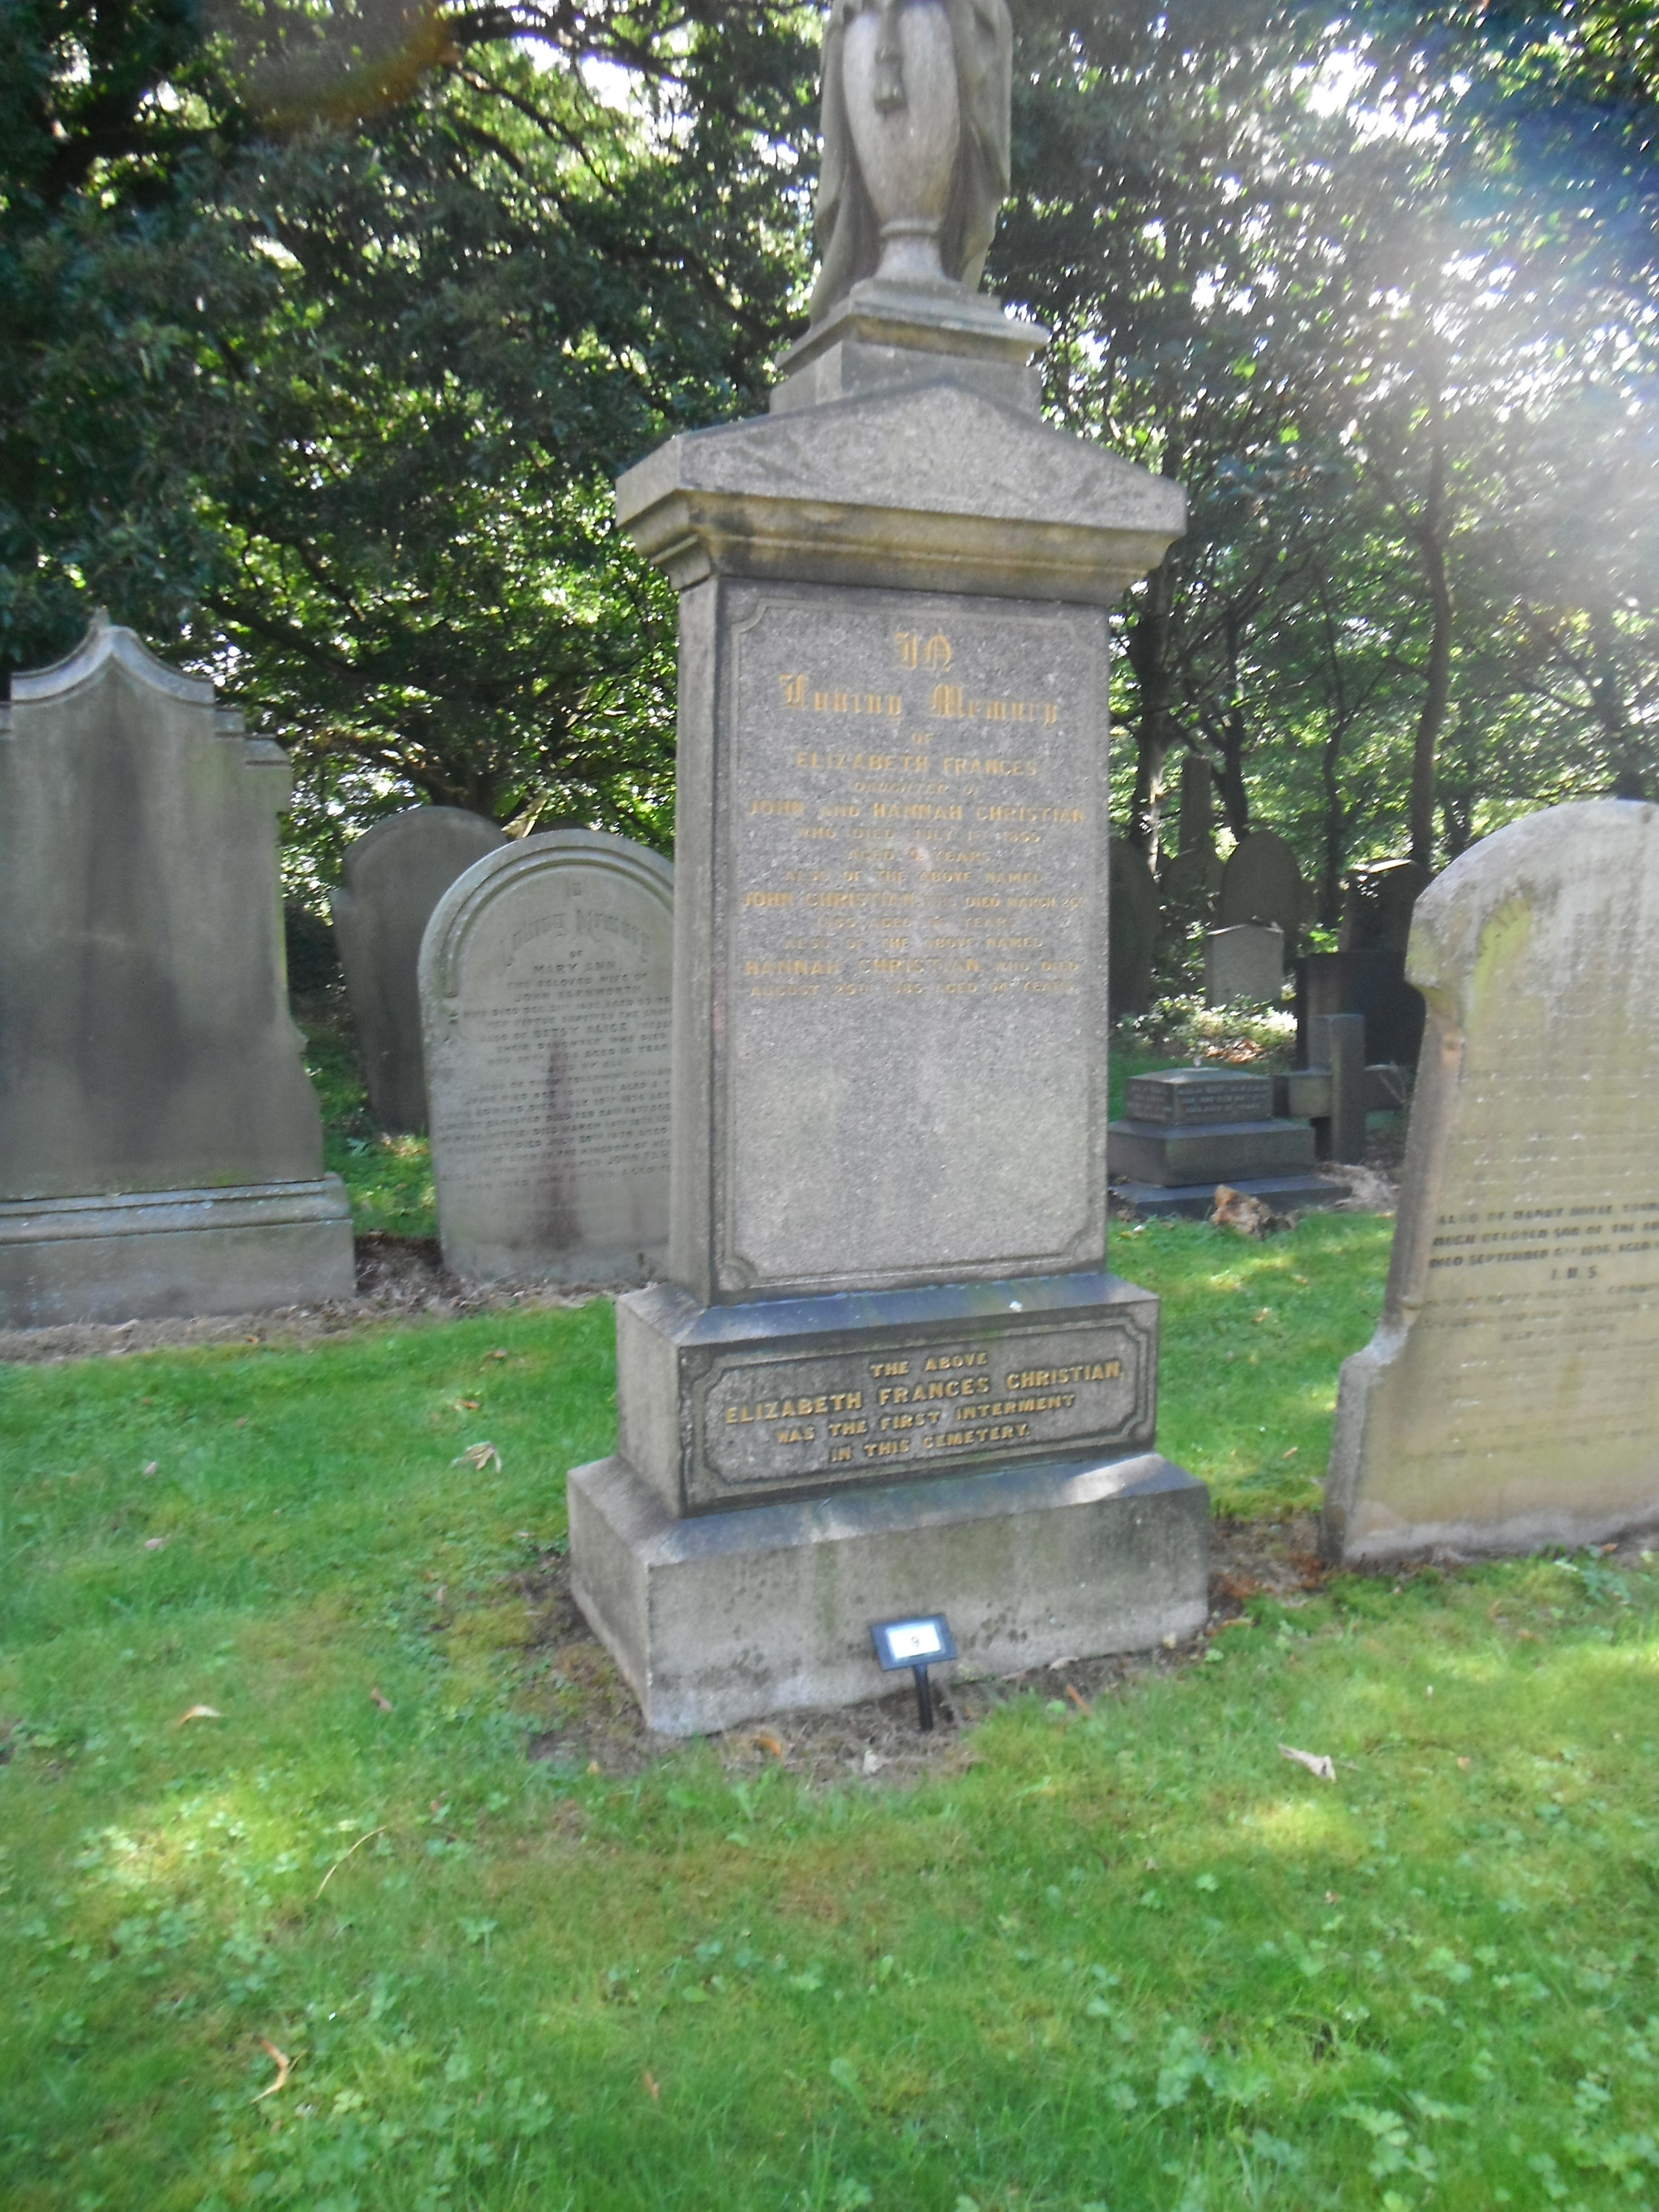 Photo taken by me - the oldest grave in Preston Cemetery